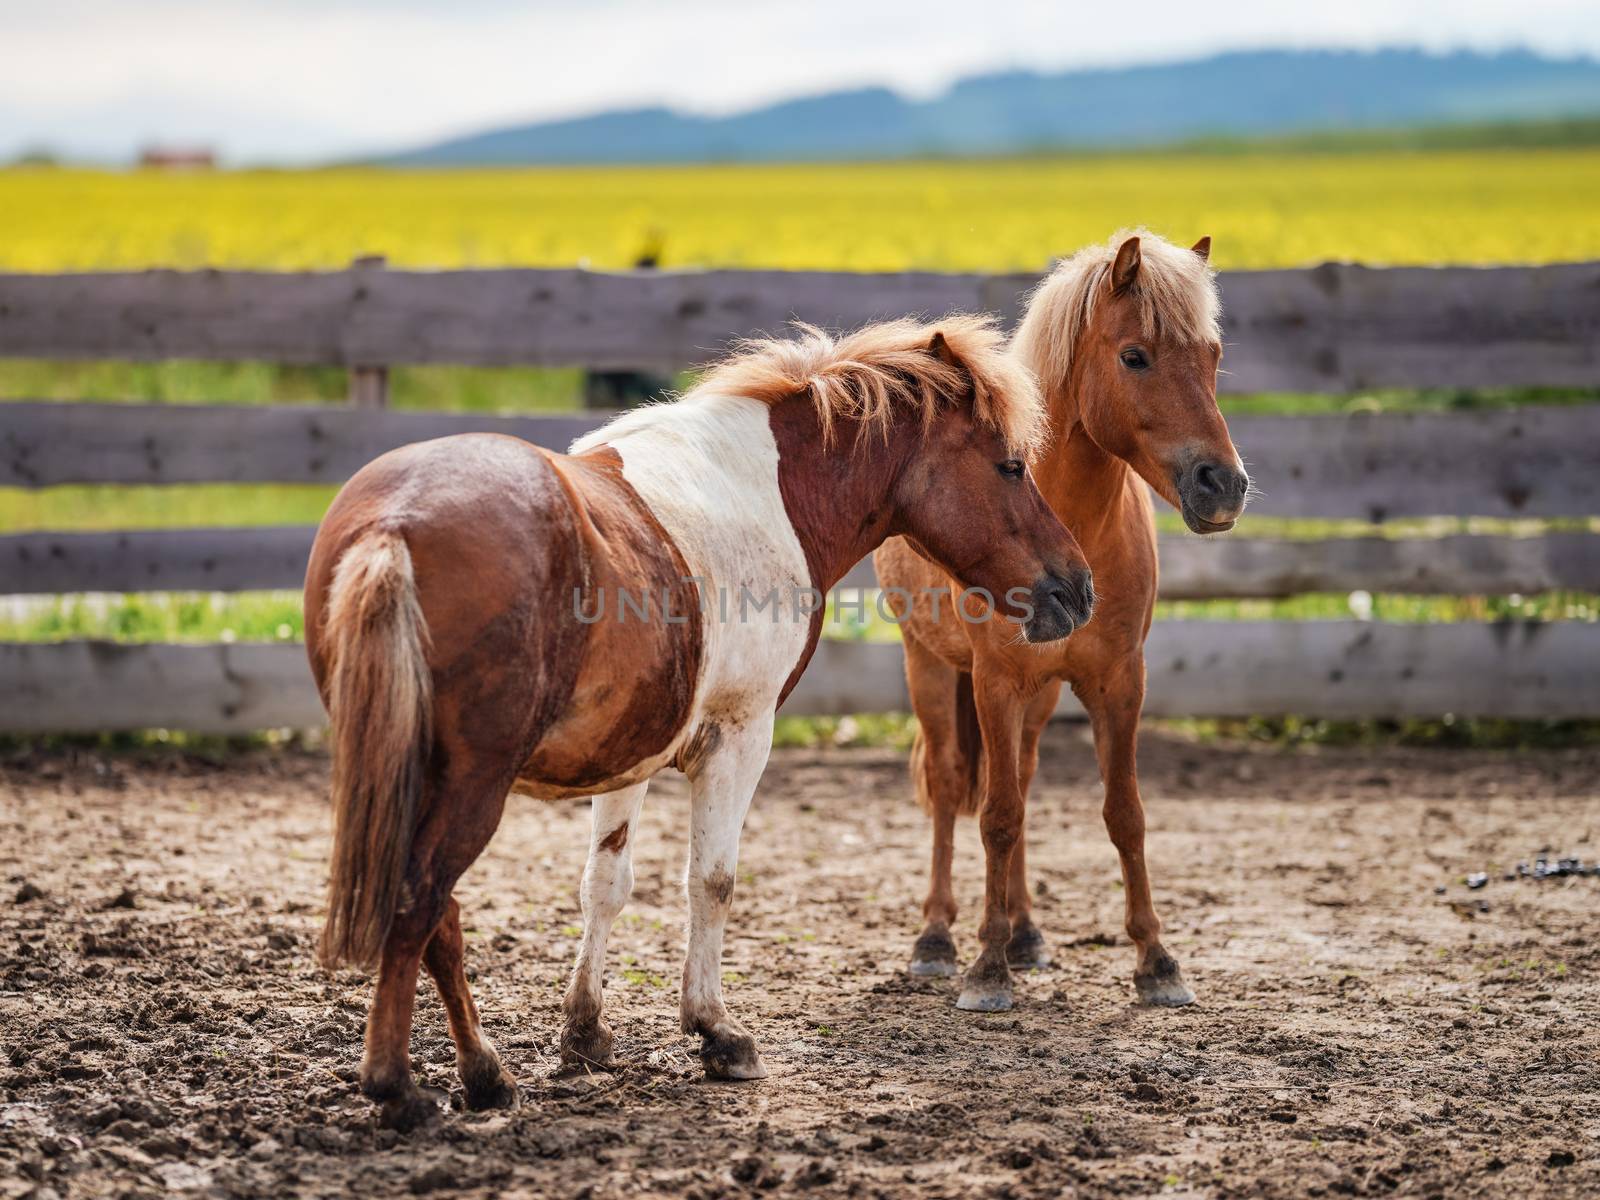 Two small brown and white pony horses on muddy ground, blurred yellow field background by Ivanko